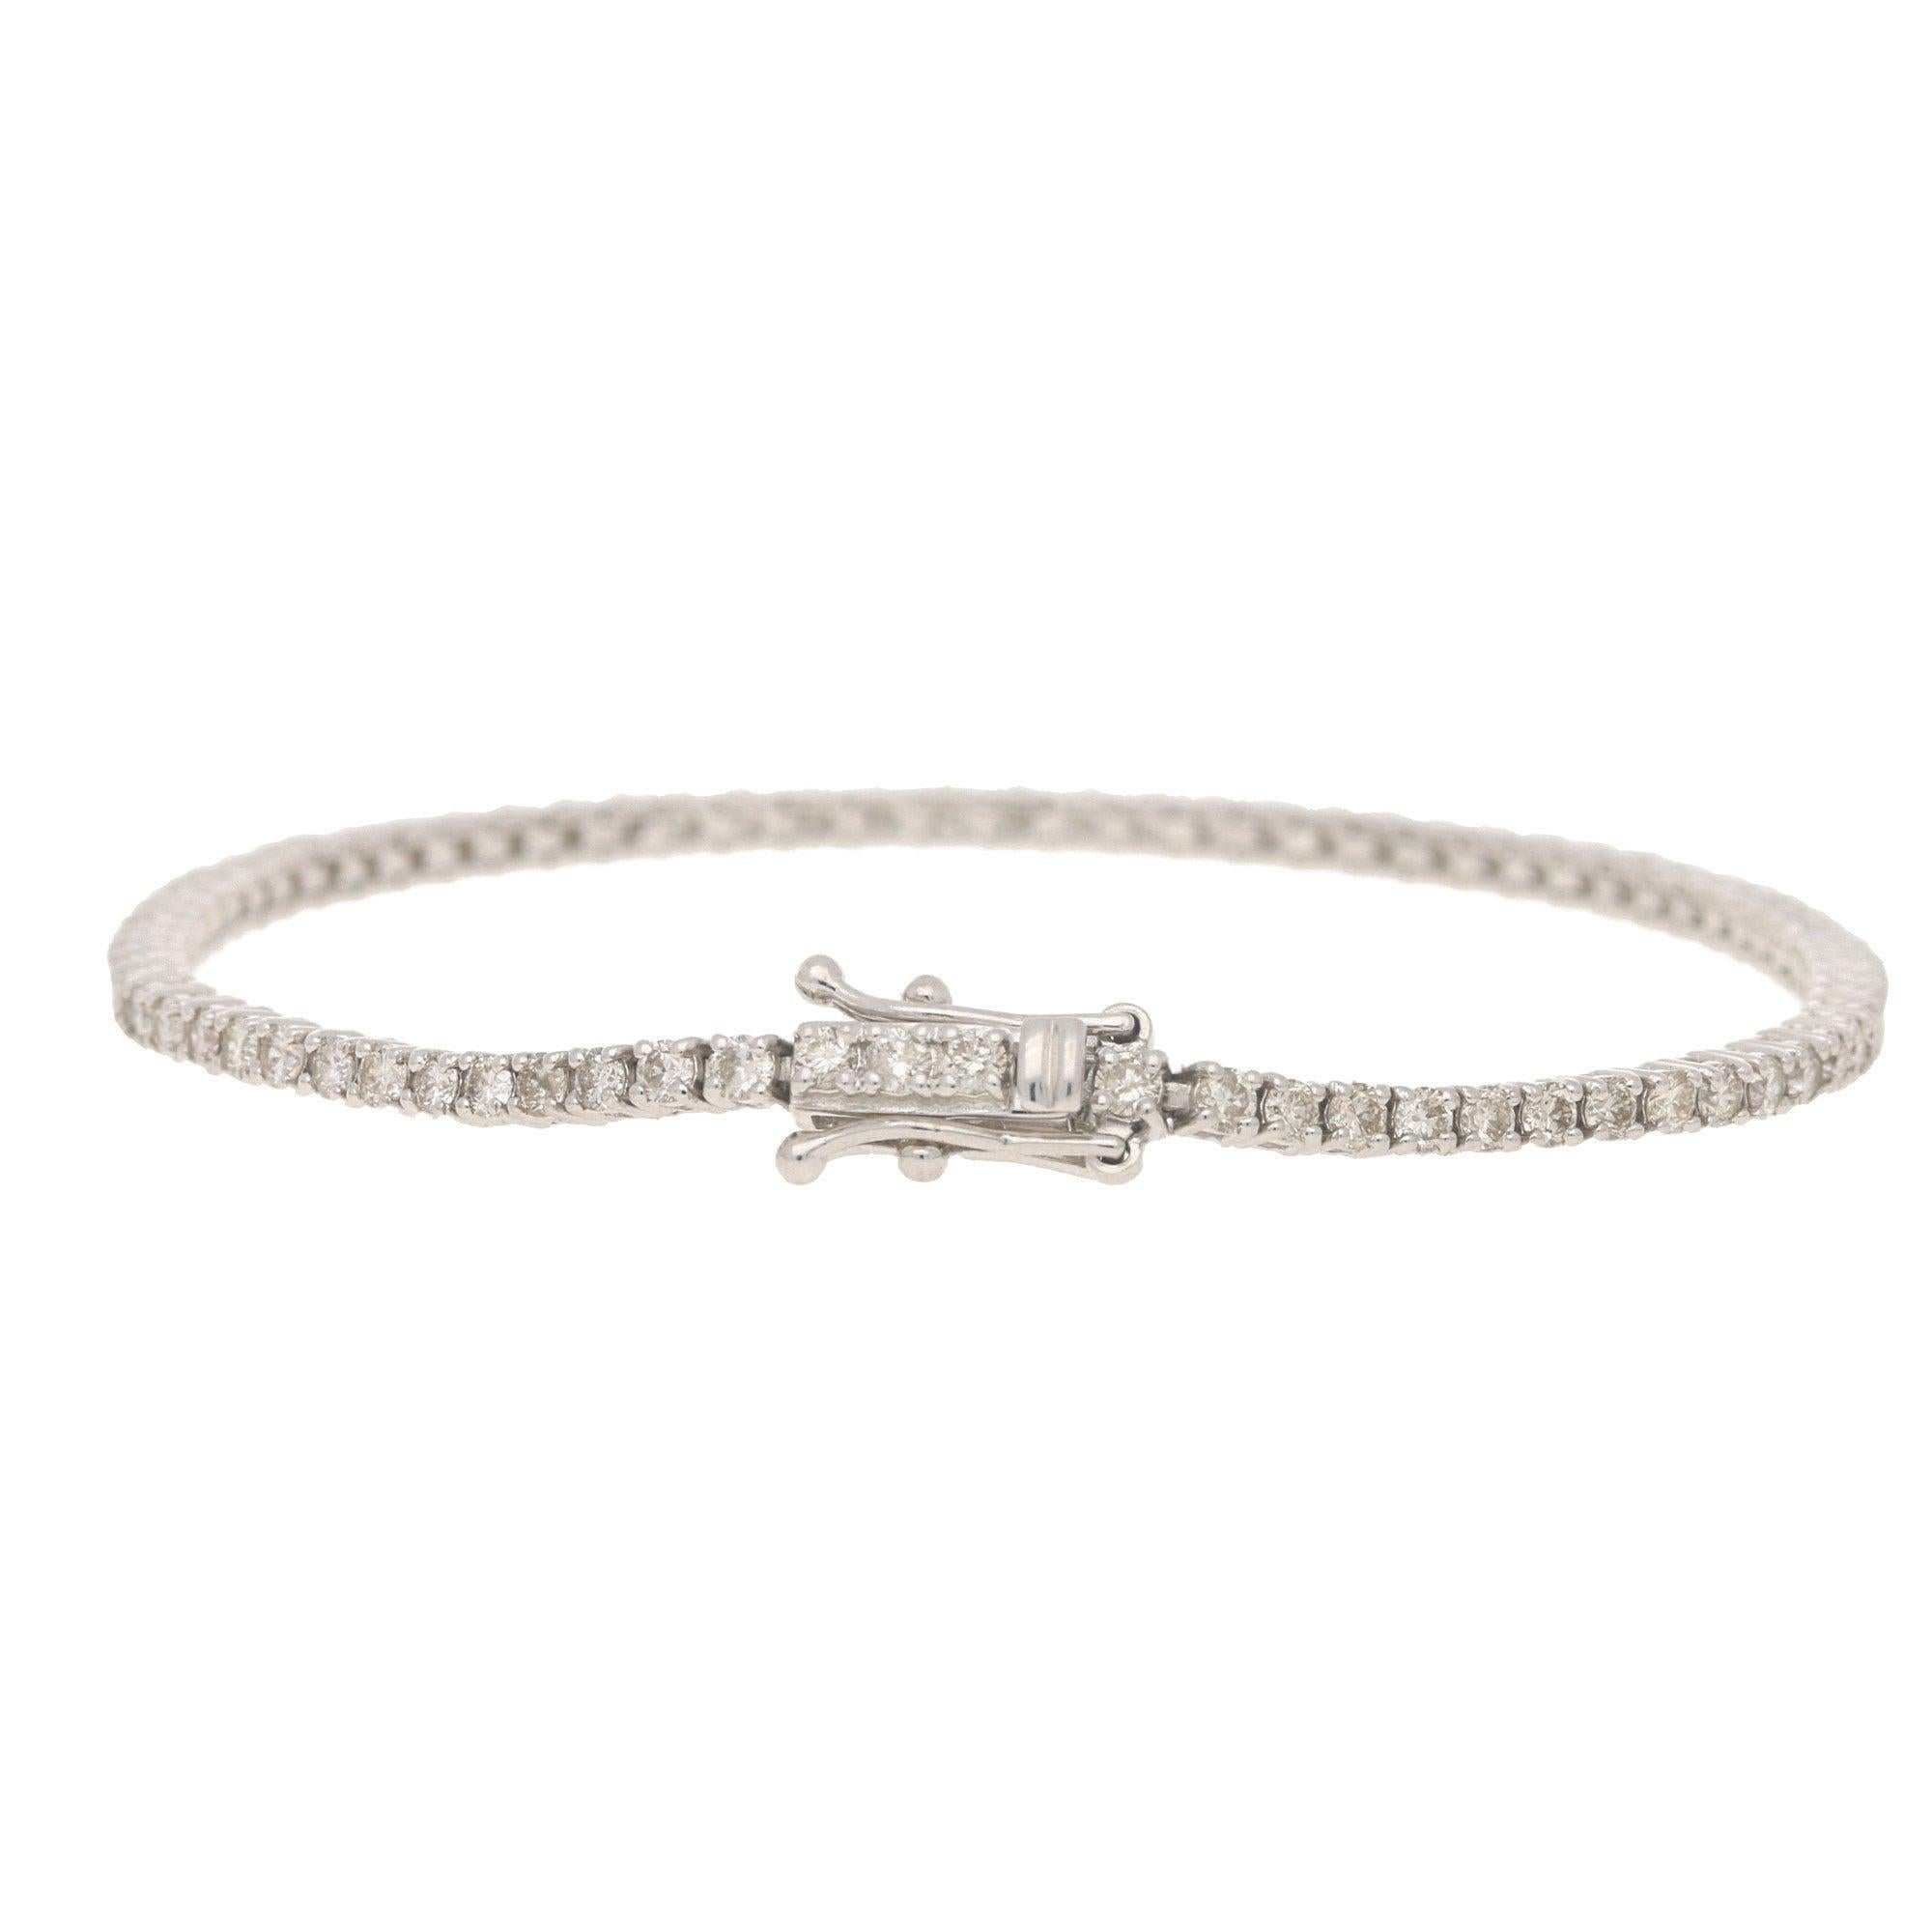 A classic diamond line bracelet set in 18k white gold. 

The bracelet is composed of exactly 77 round brilliant cut diamonds which are all seamlessly set in articulated claw settings. This particular design is a firm favourite as it can be worn for